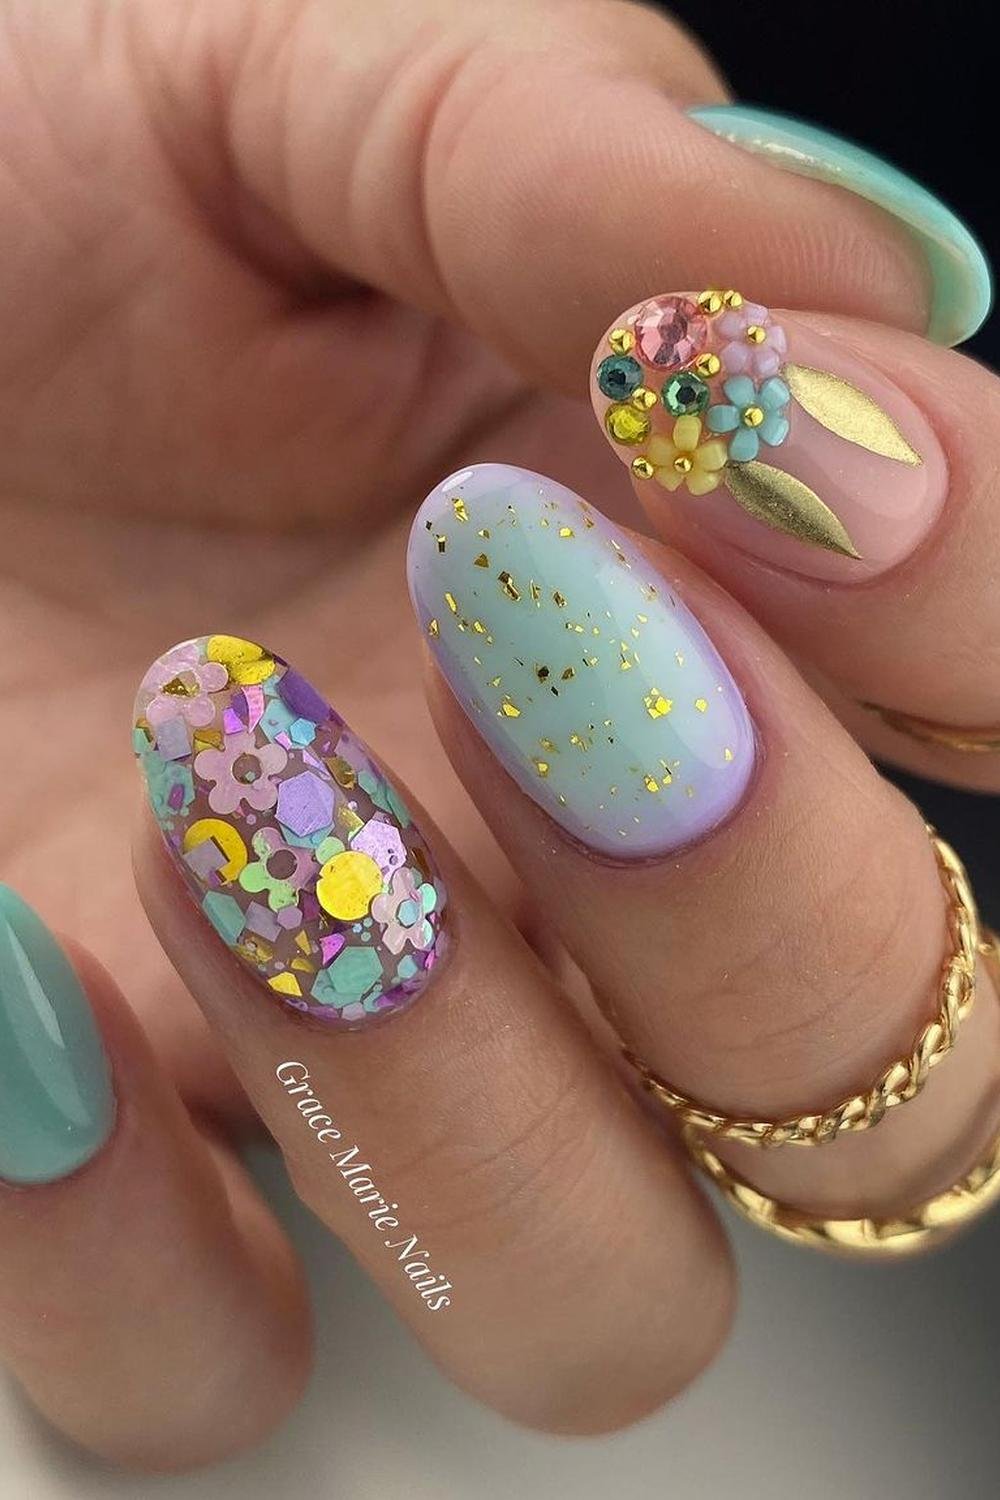 26 - Picture of Whimsical Nails